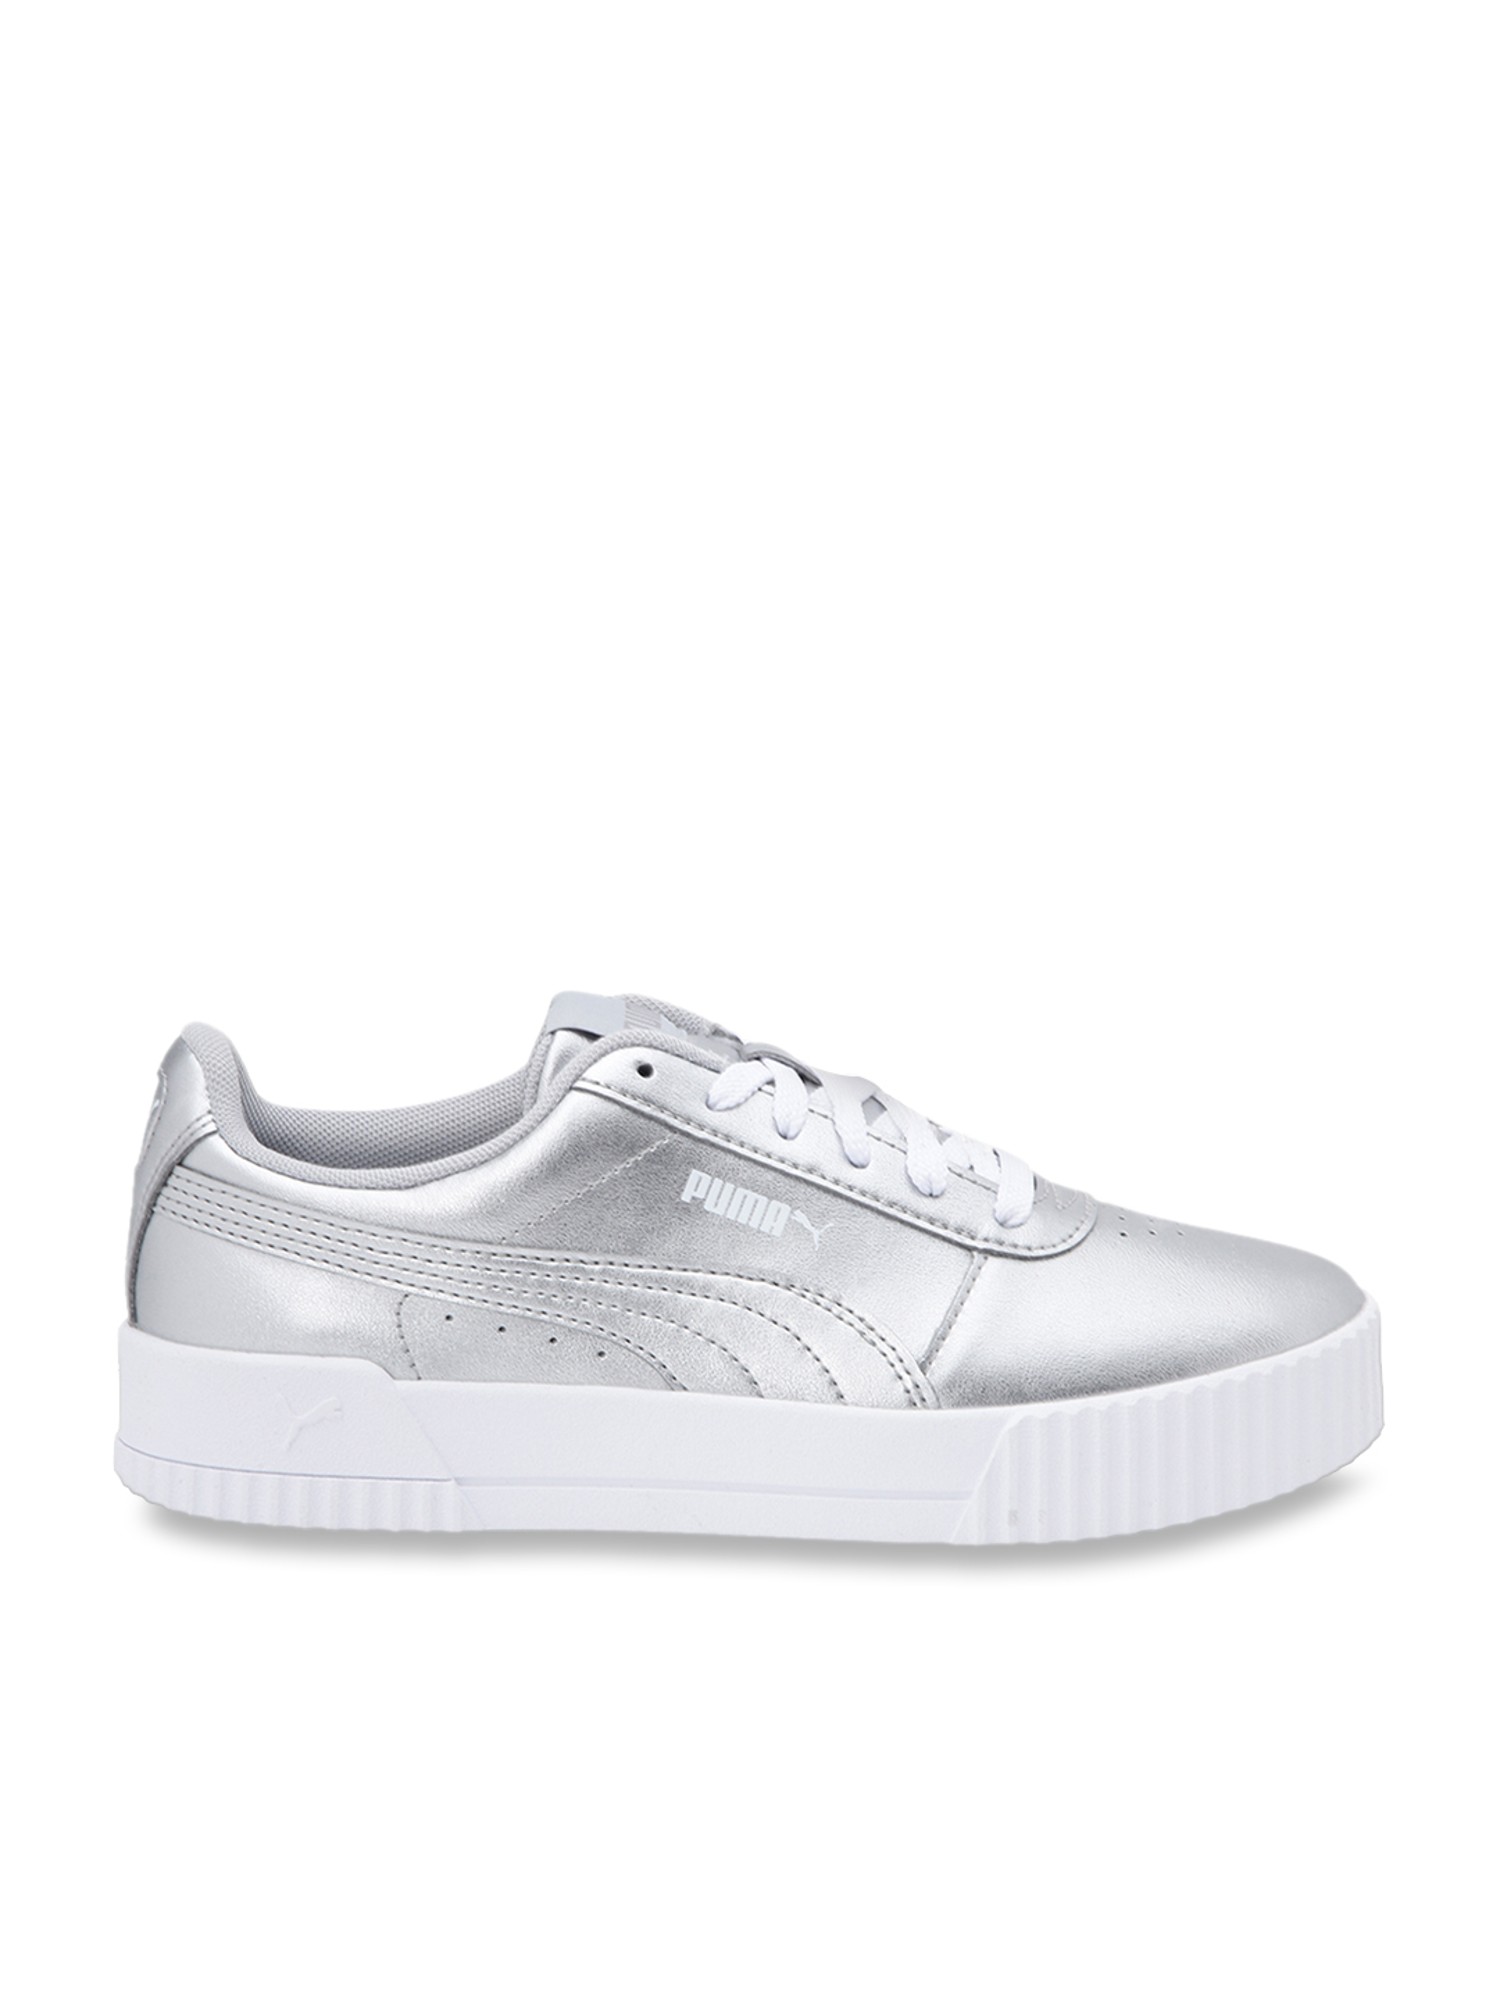 Buy Puma Women's Carina Silver Sneakers from top Brands at Best Prices  Online in India | Tata CLiQ